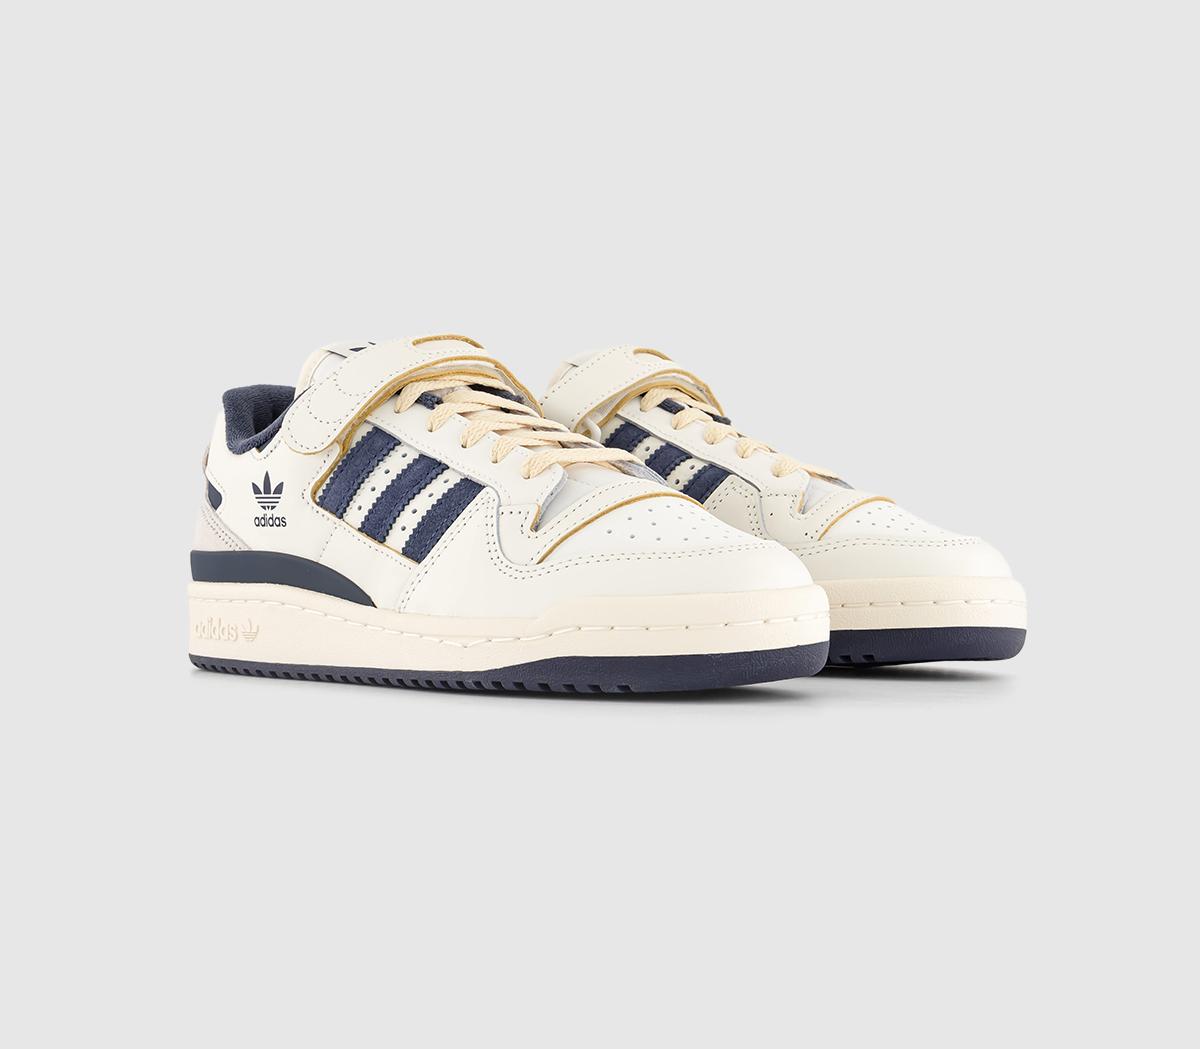 Adidas Womens Forum 84 Low Trainers Offwhite Shadow Navy Cream White, 9